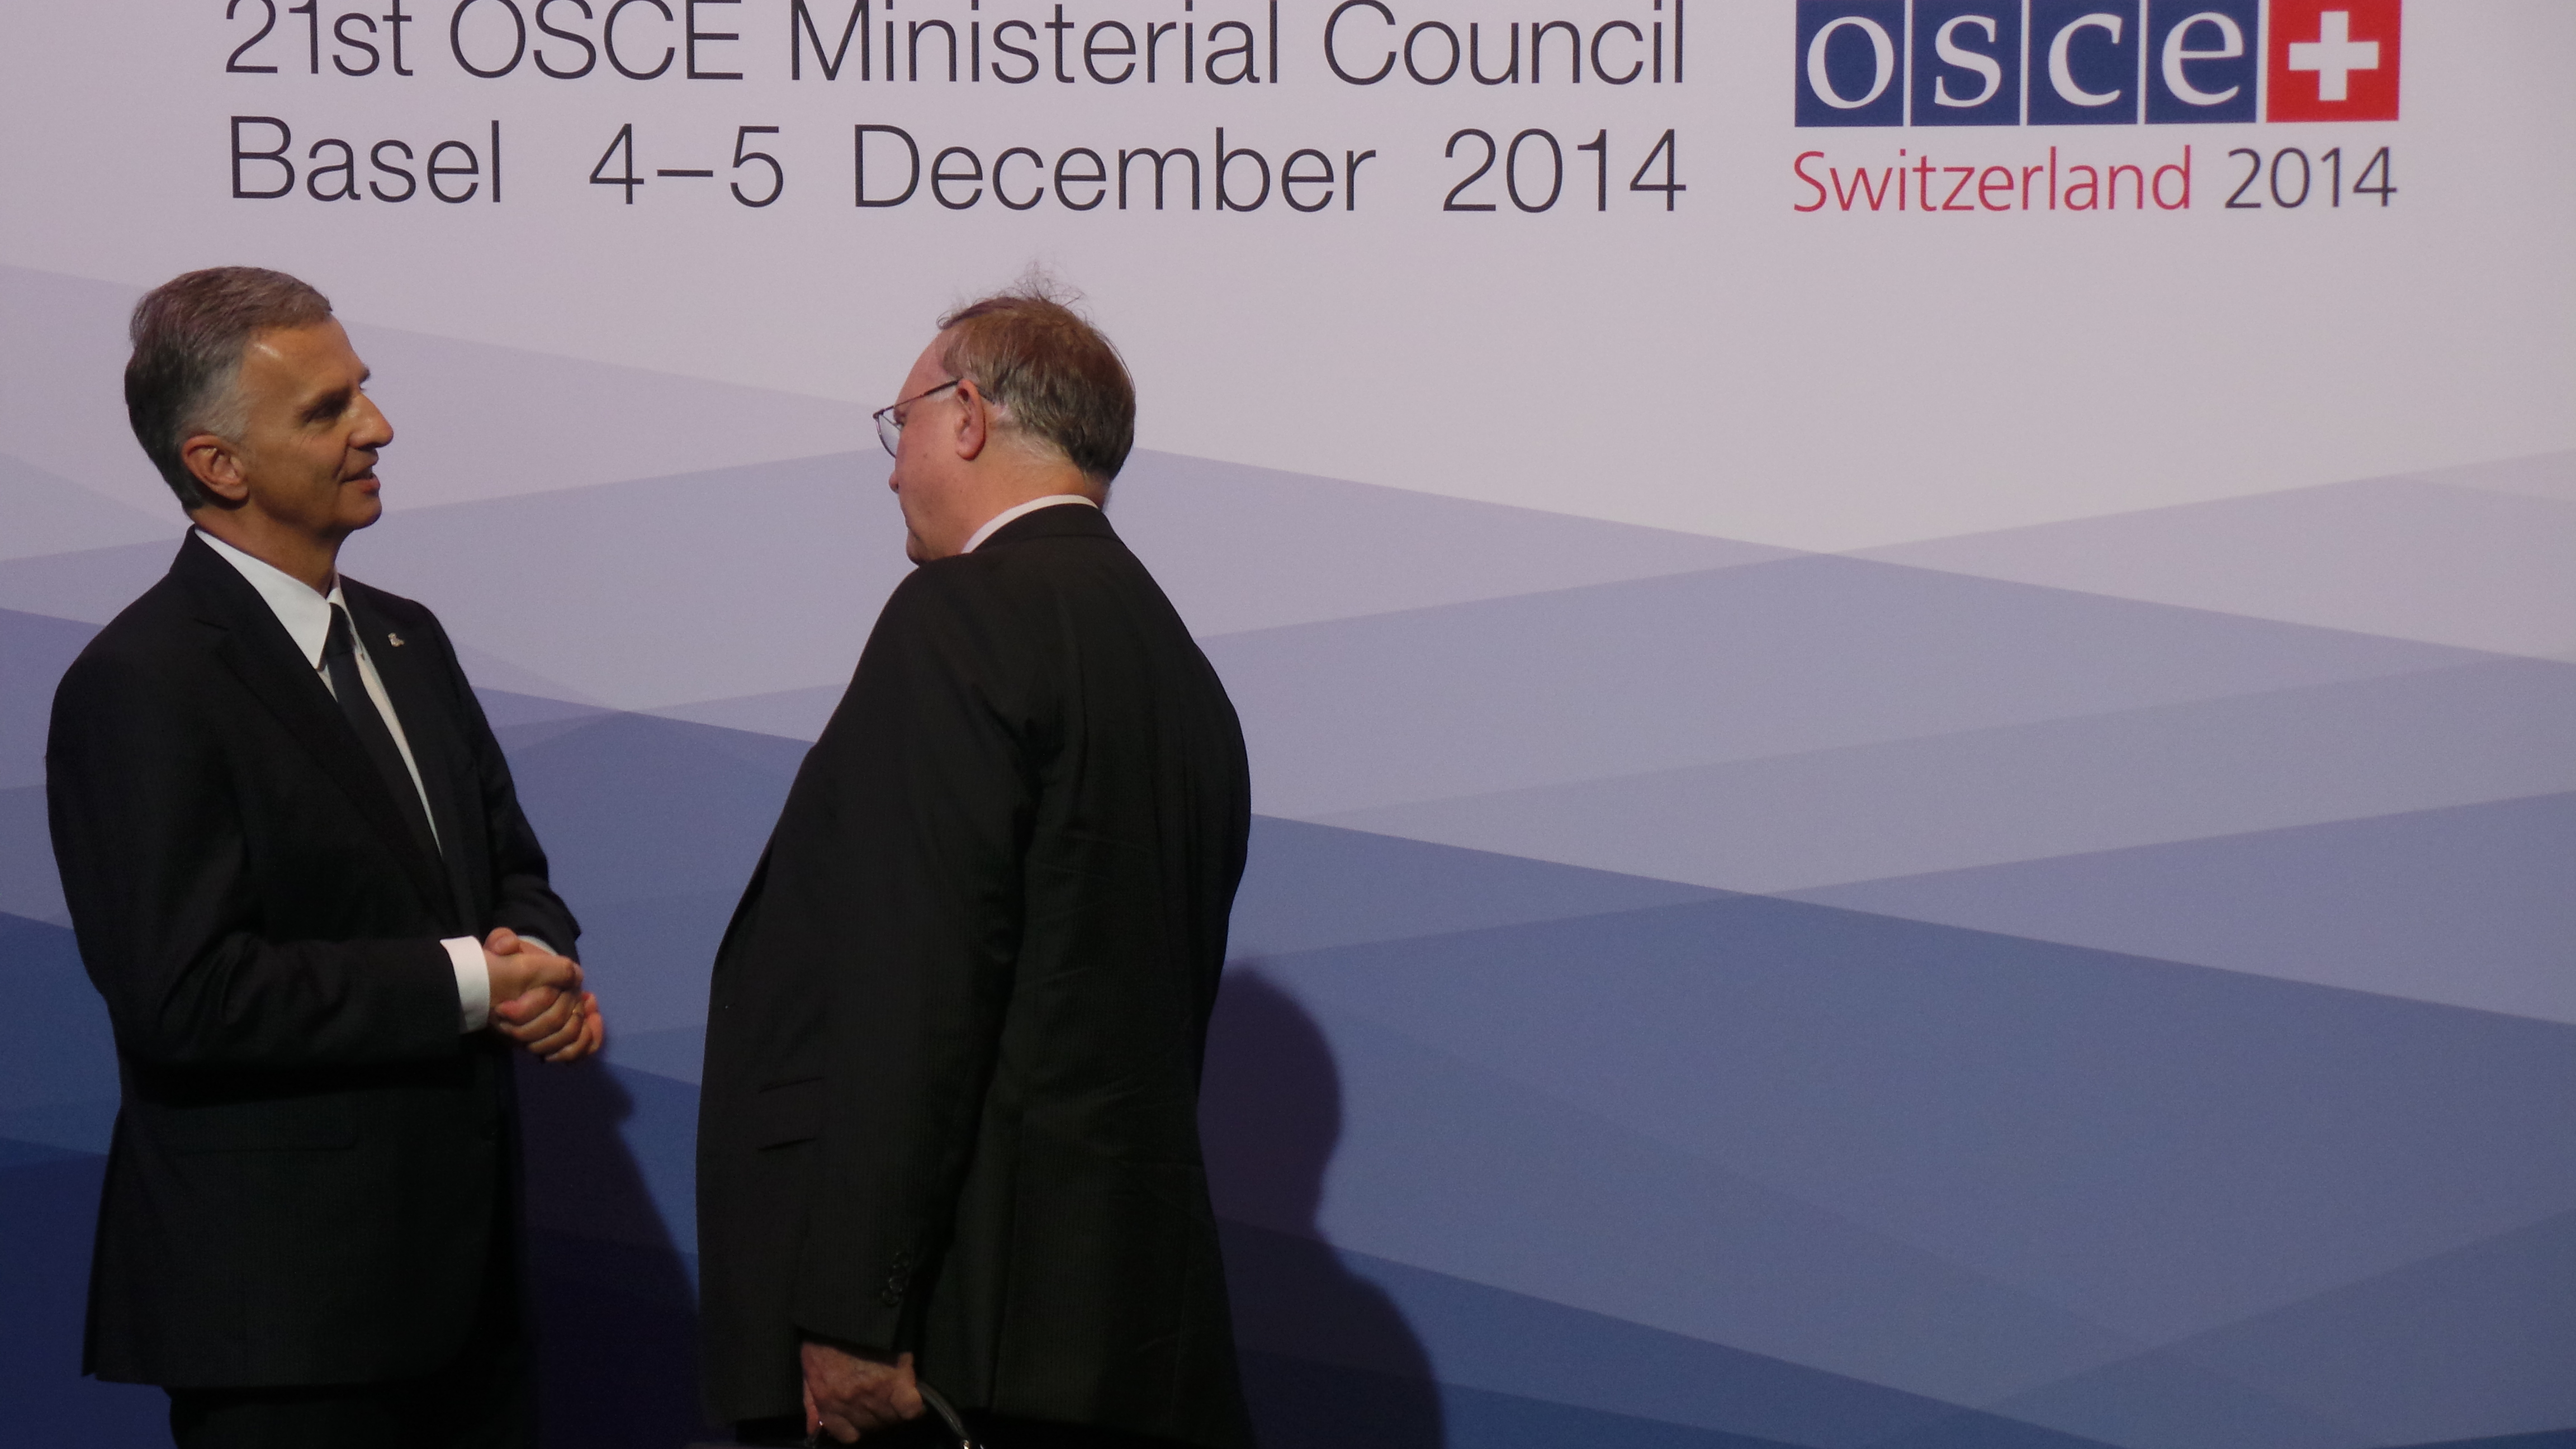 The President of the Swiss Confederation, Didier Burkhalter, greets David Gordon Stuart, Permanent Representative to the OSCE in Australia at the OSCE Ministerial Council 2014 in Basel